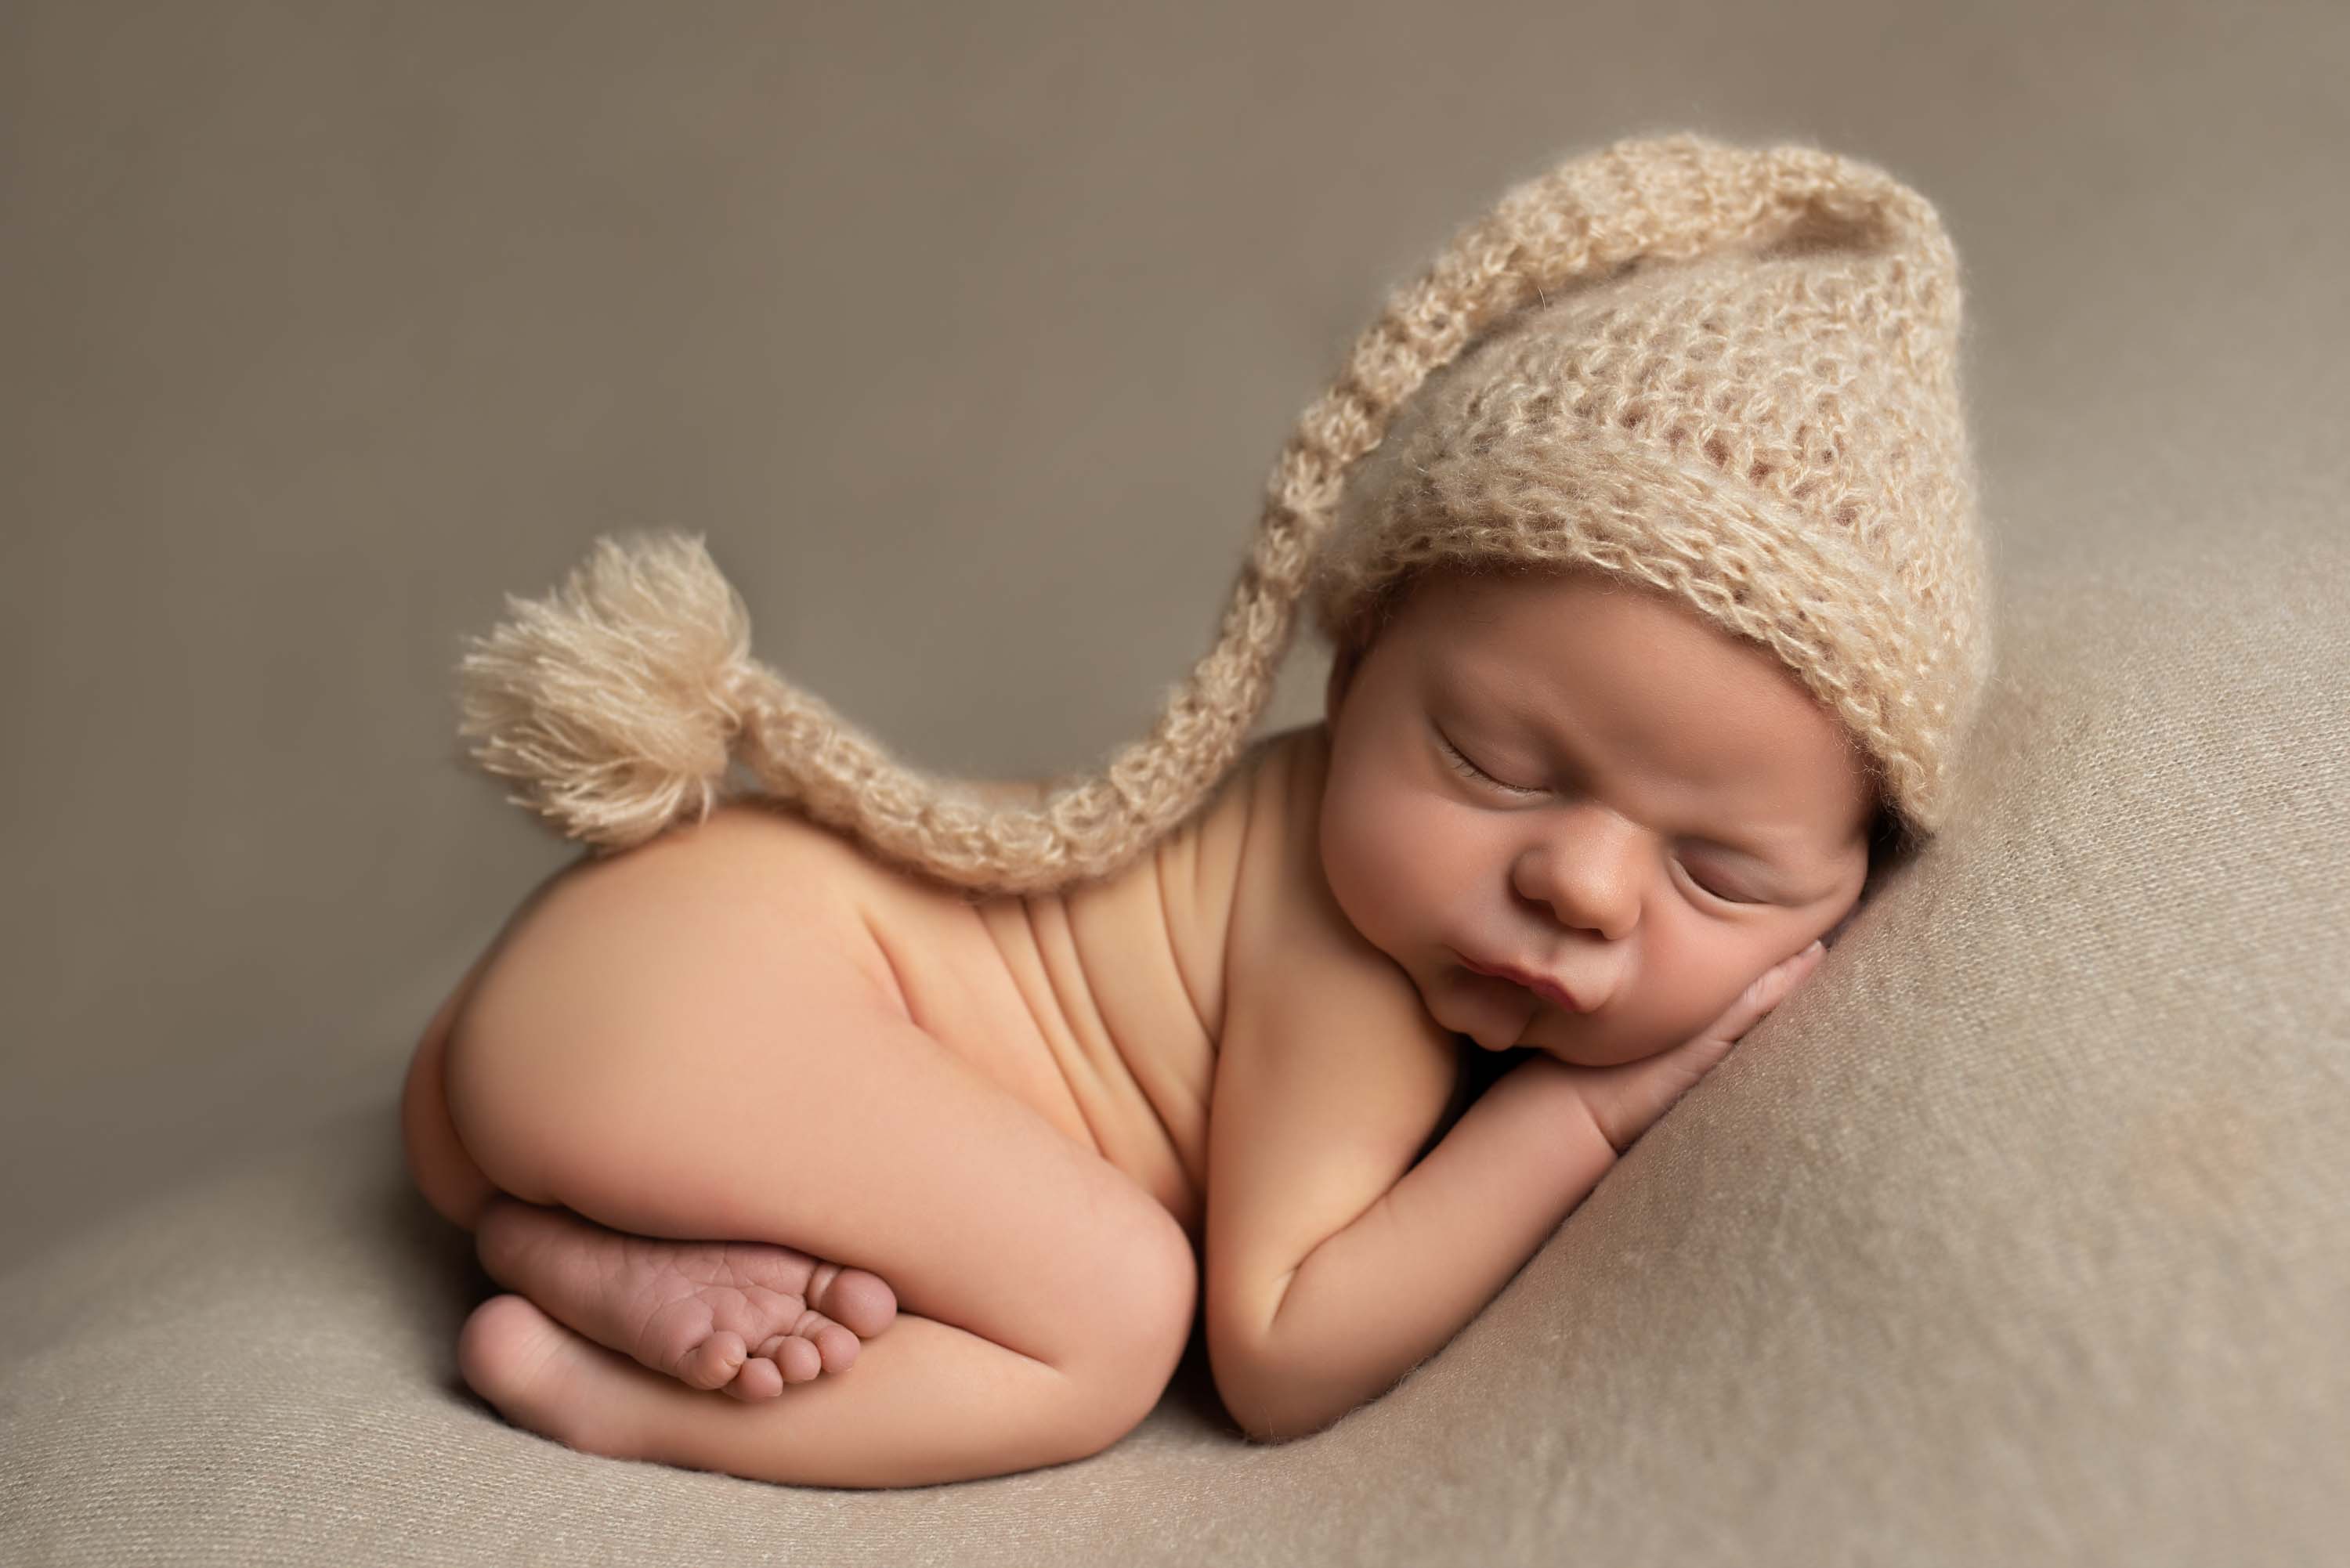 Newborn baby boy in tushee-up pose with long knitted hat